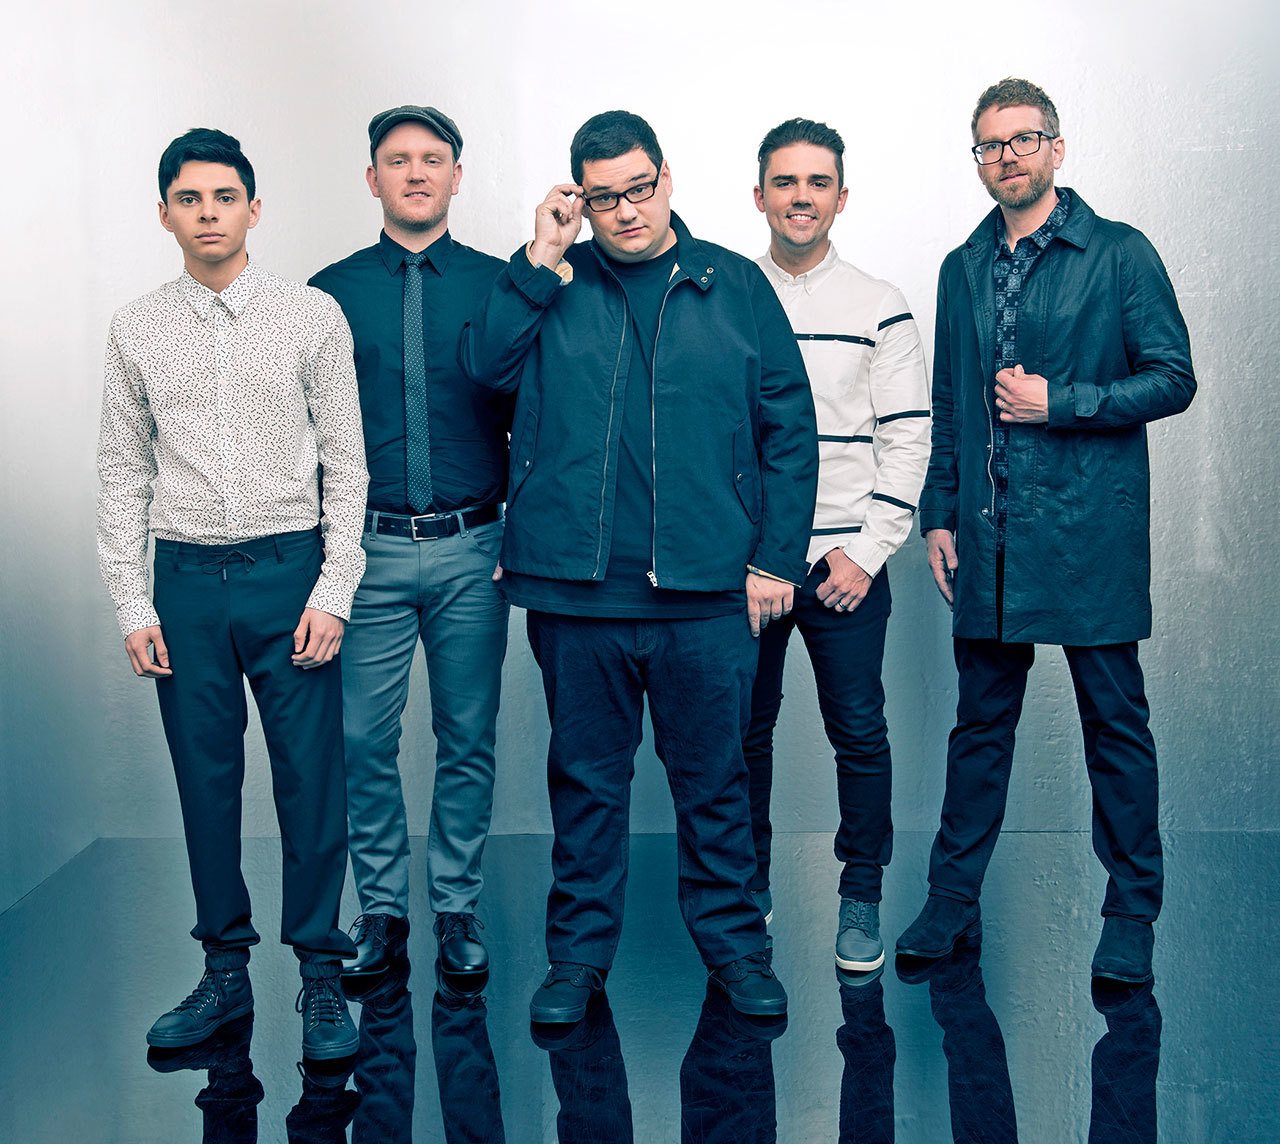 The Sidewalk Prophets is an award-winning band that strives diligently for excellence in all things. COURTESY PHOTO